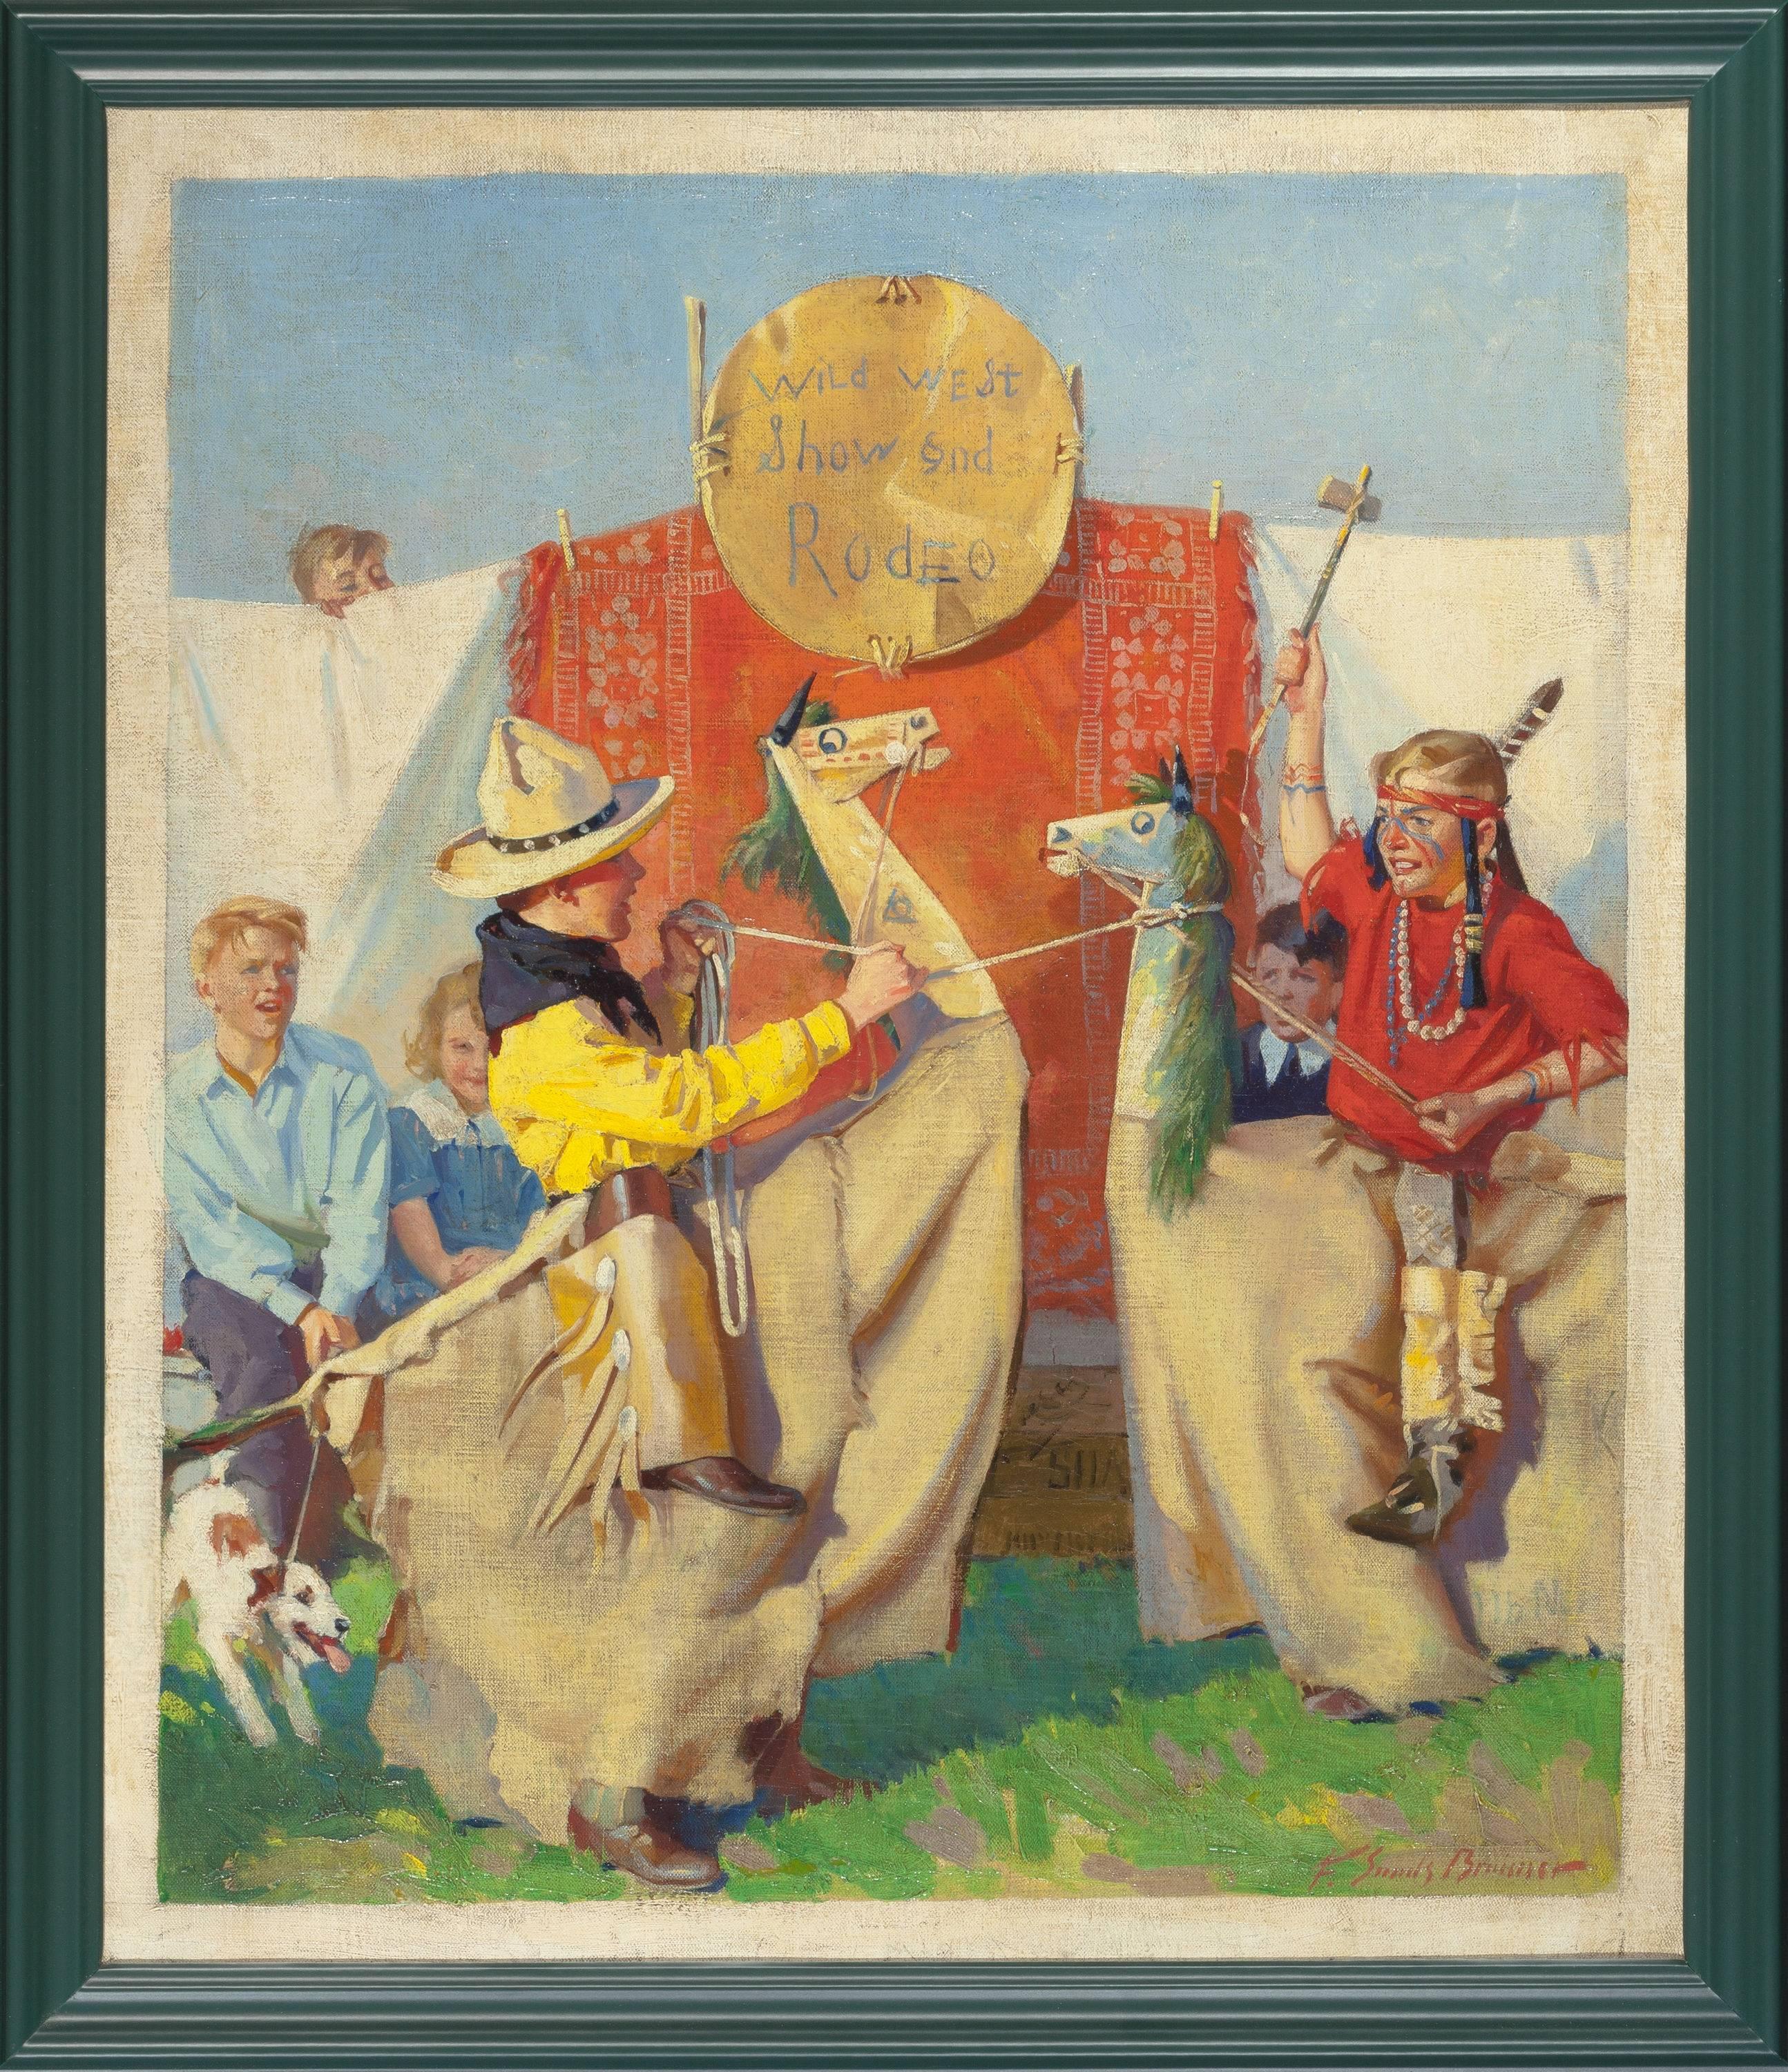 Wild West Show & Rodeo - Painting by Frederick Sands Brunner